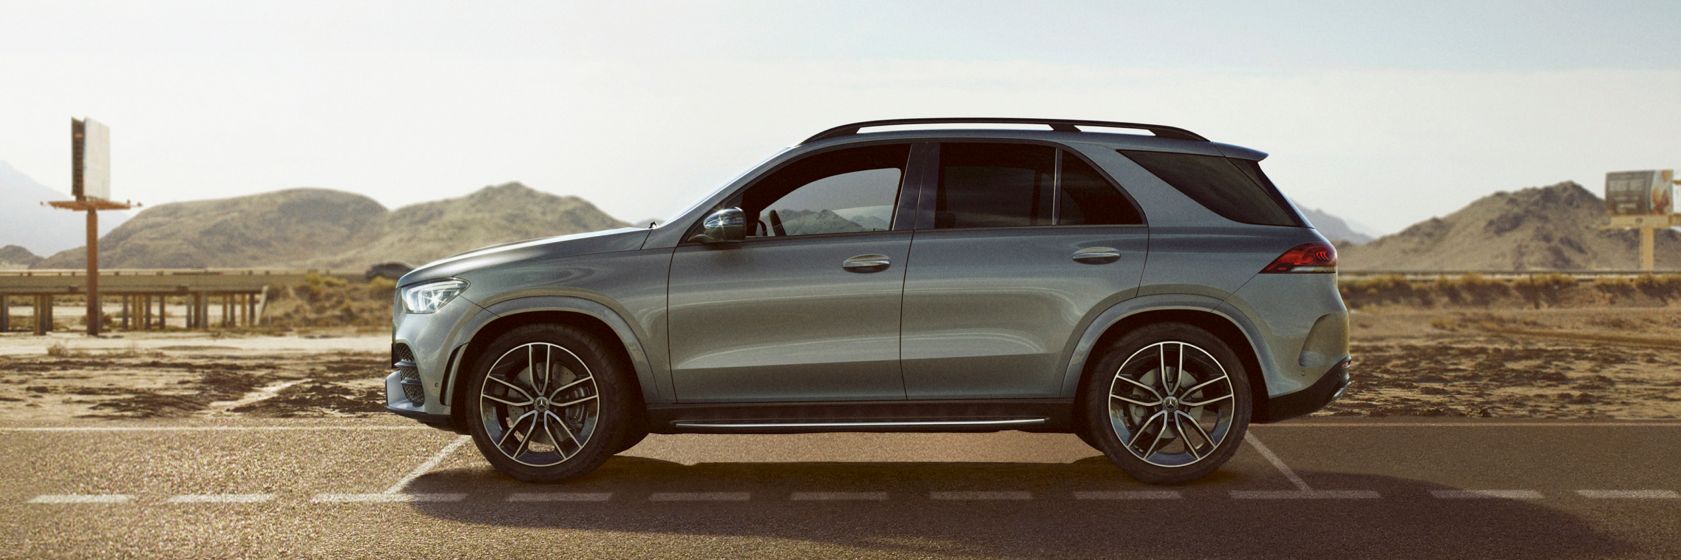 Mercedes GLE SUV 7 places Groupe Chevalley